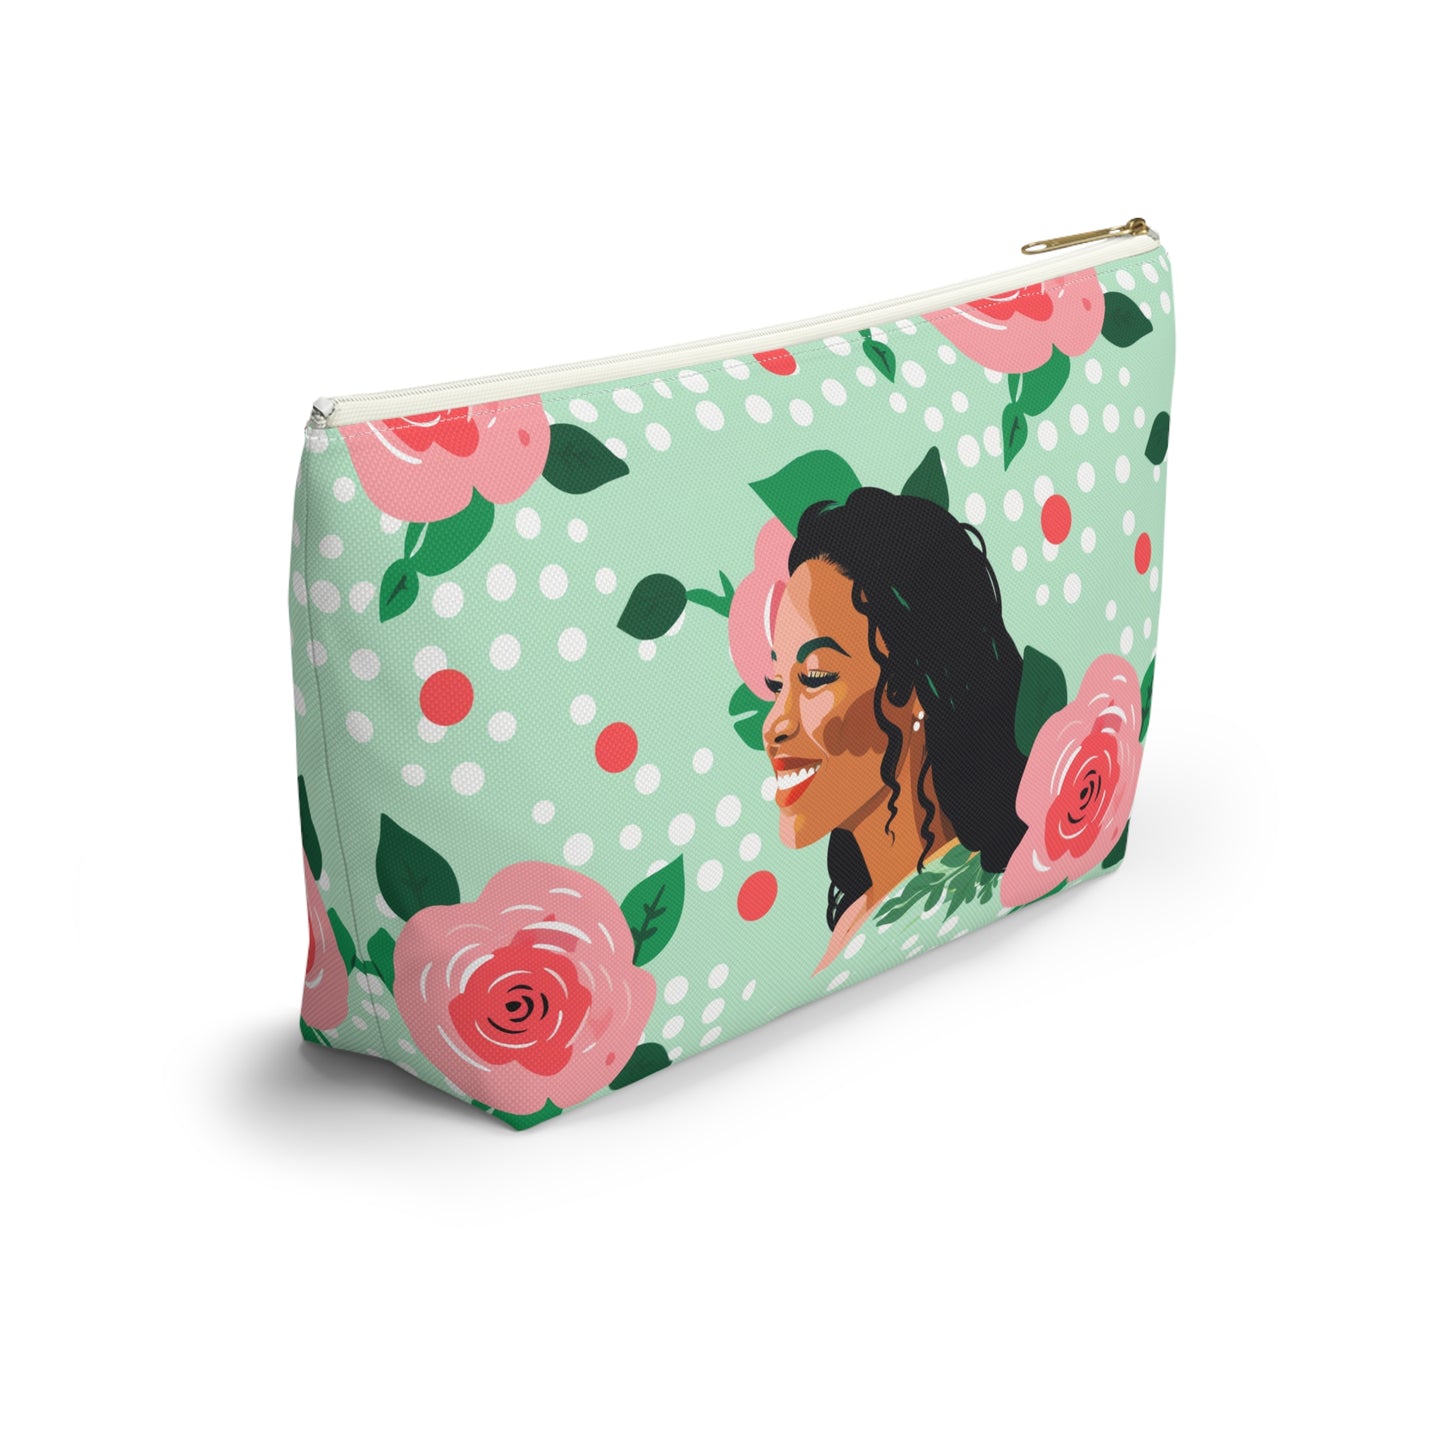 Brenda Accessory Pouch, Cosmetic & Toiletry Bag, Travel Bag